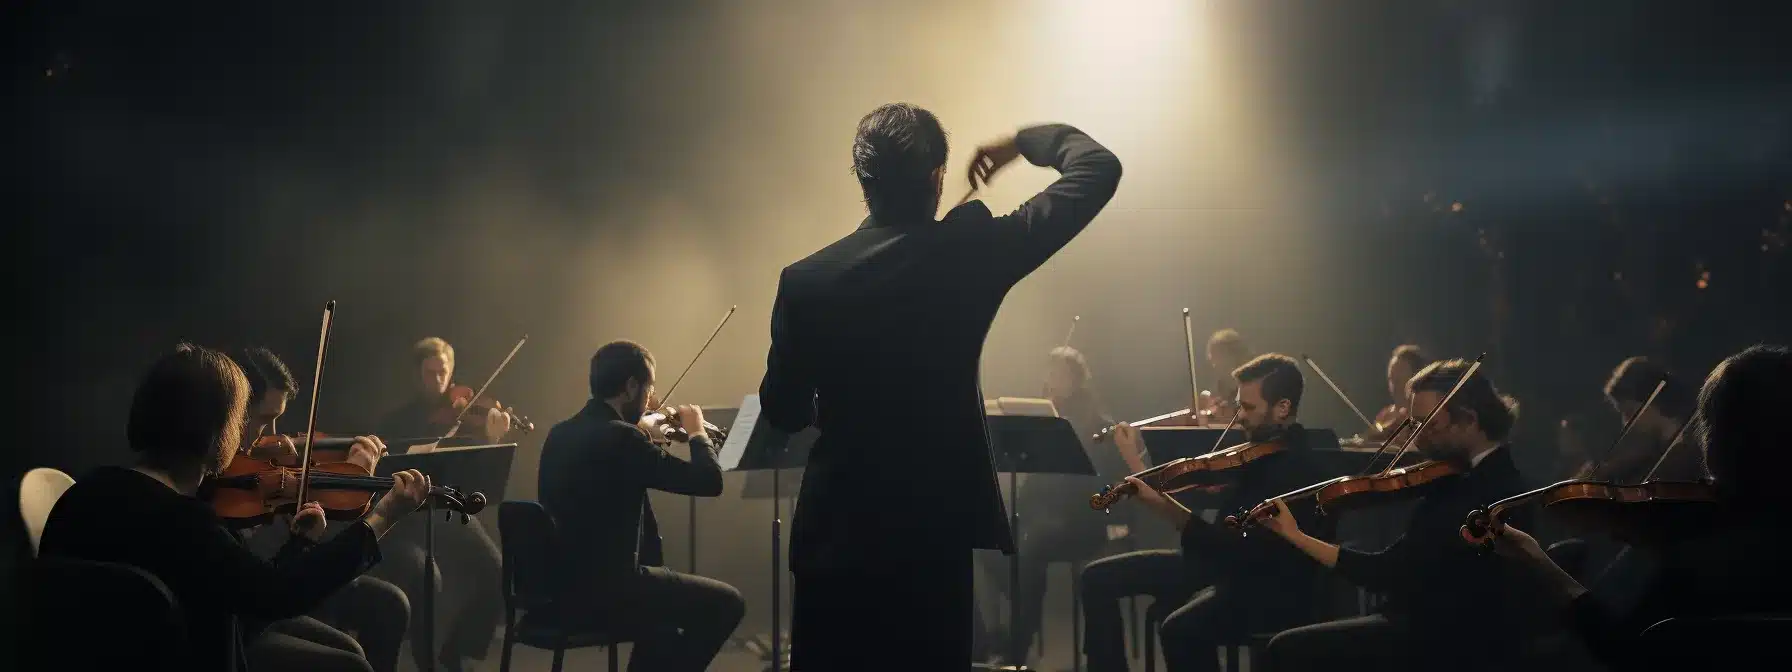 A Symphony Conductor Leading A Performance With A Diverse Group Of Musicians Playing Various Instruments.